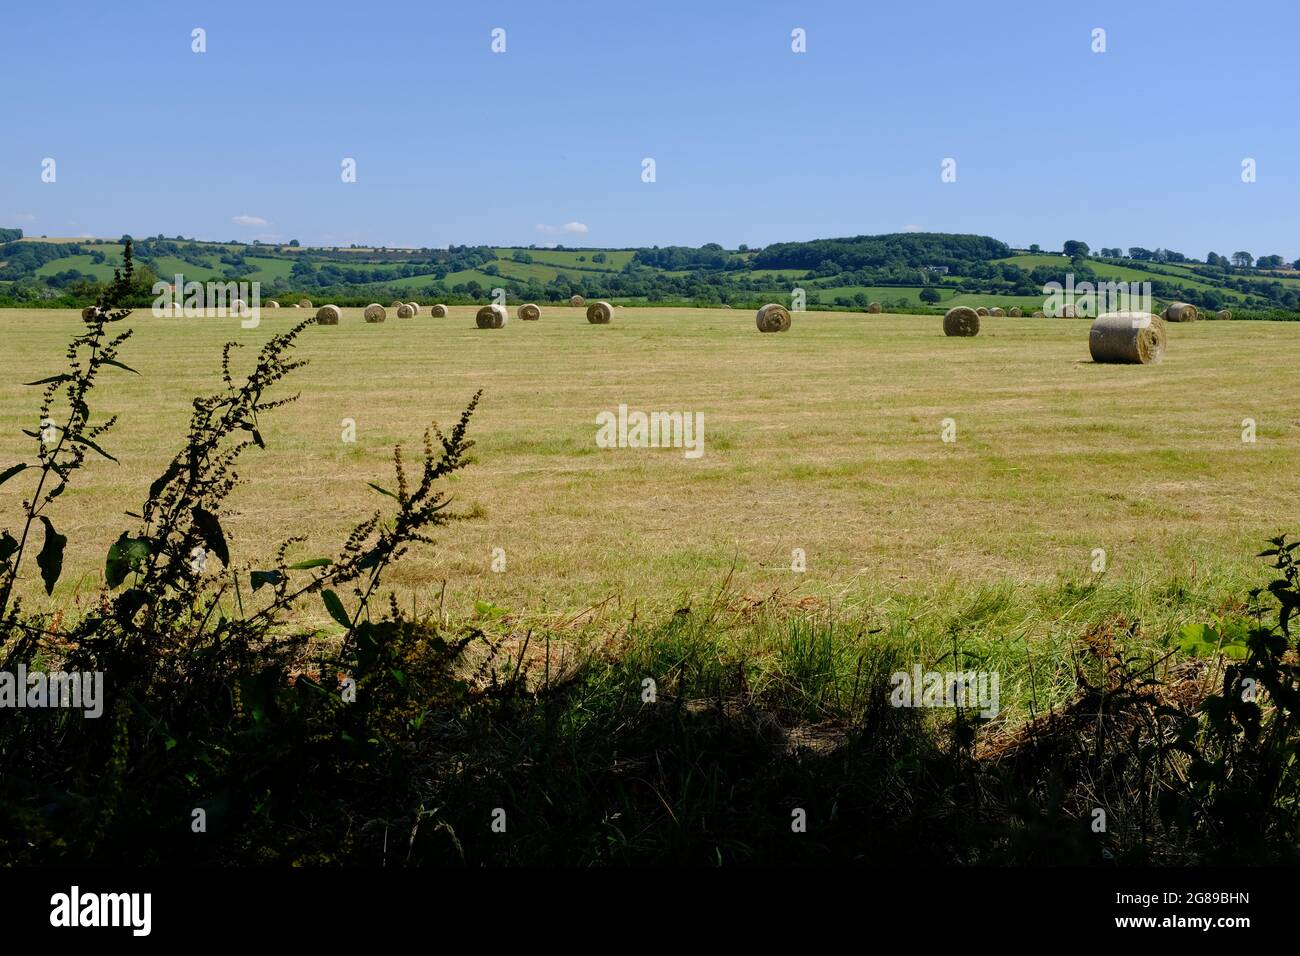 Hay bales in a field on the Wick Golden Valley nature reserve trail in Wick, Bristol, UK Stock Photo